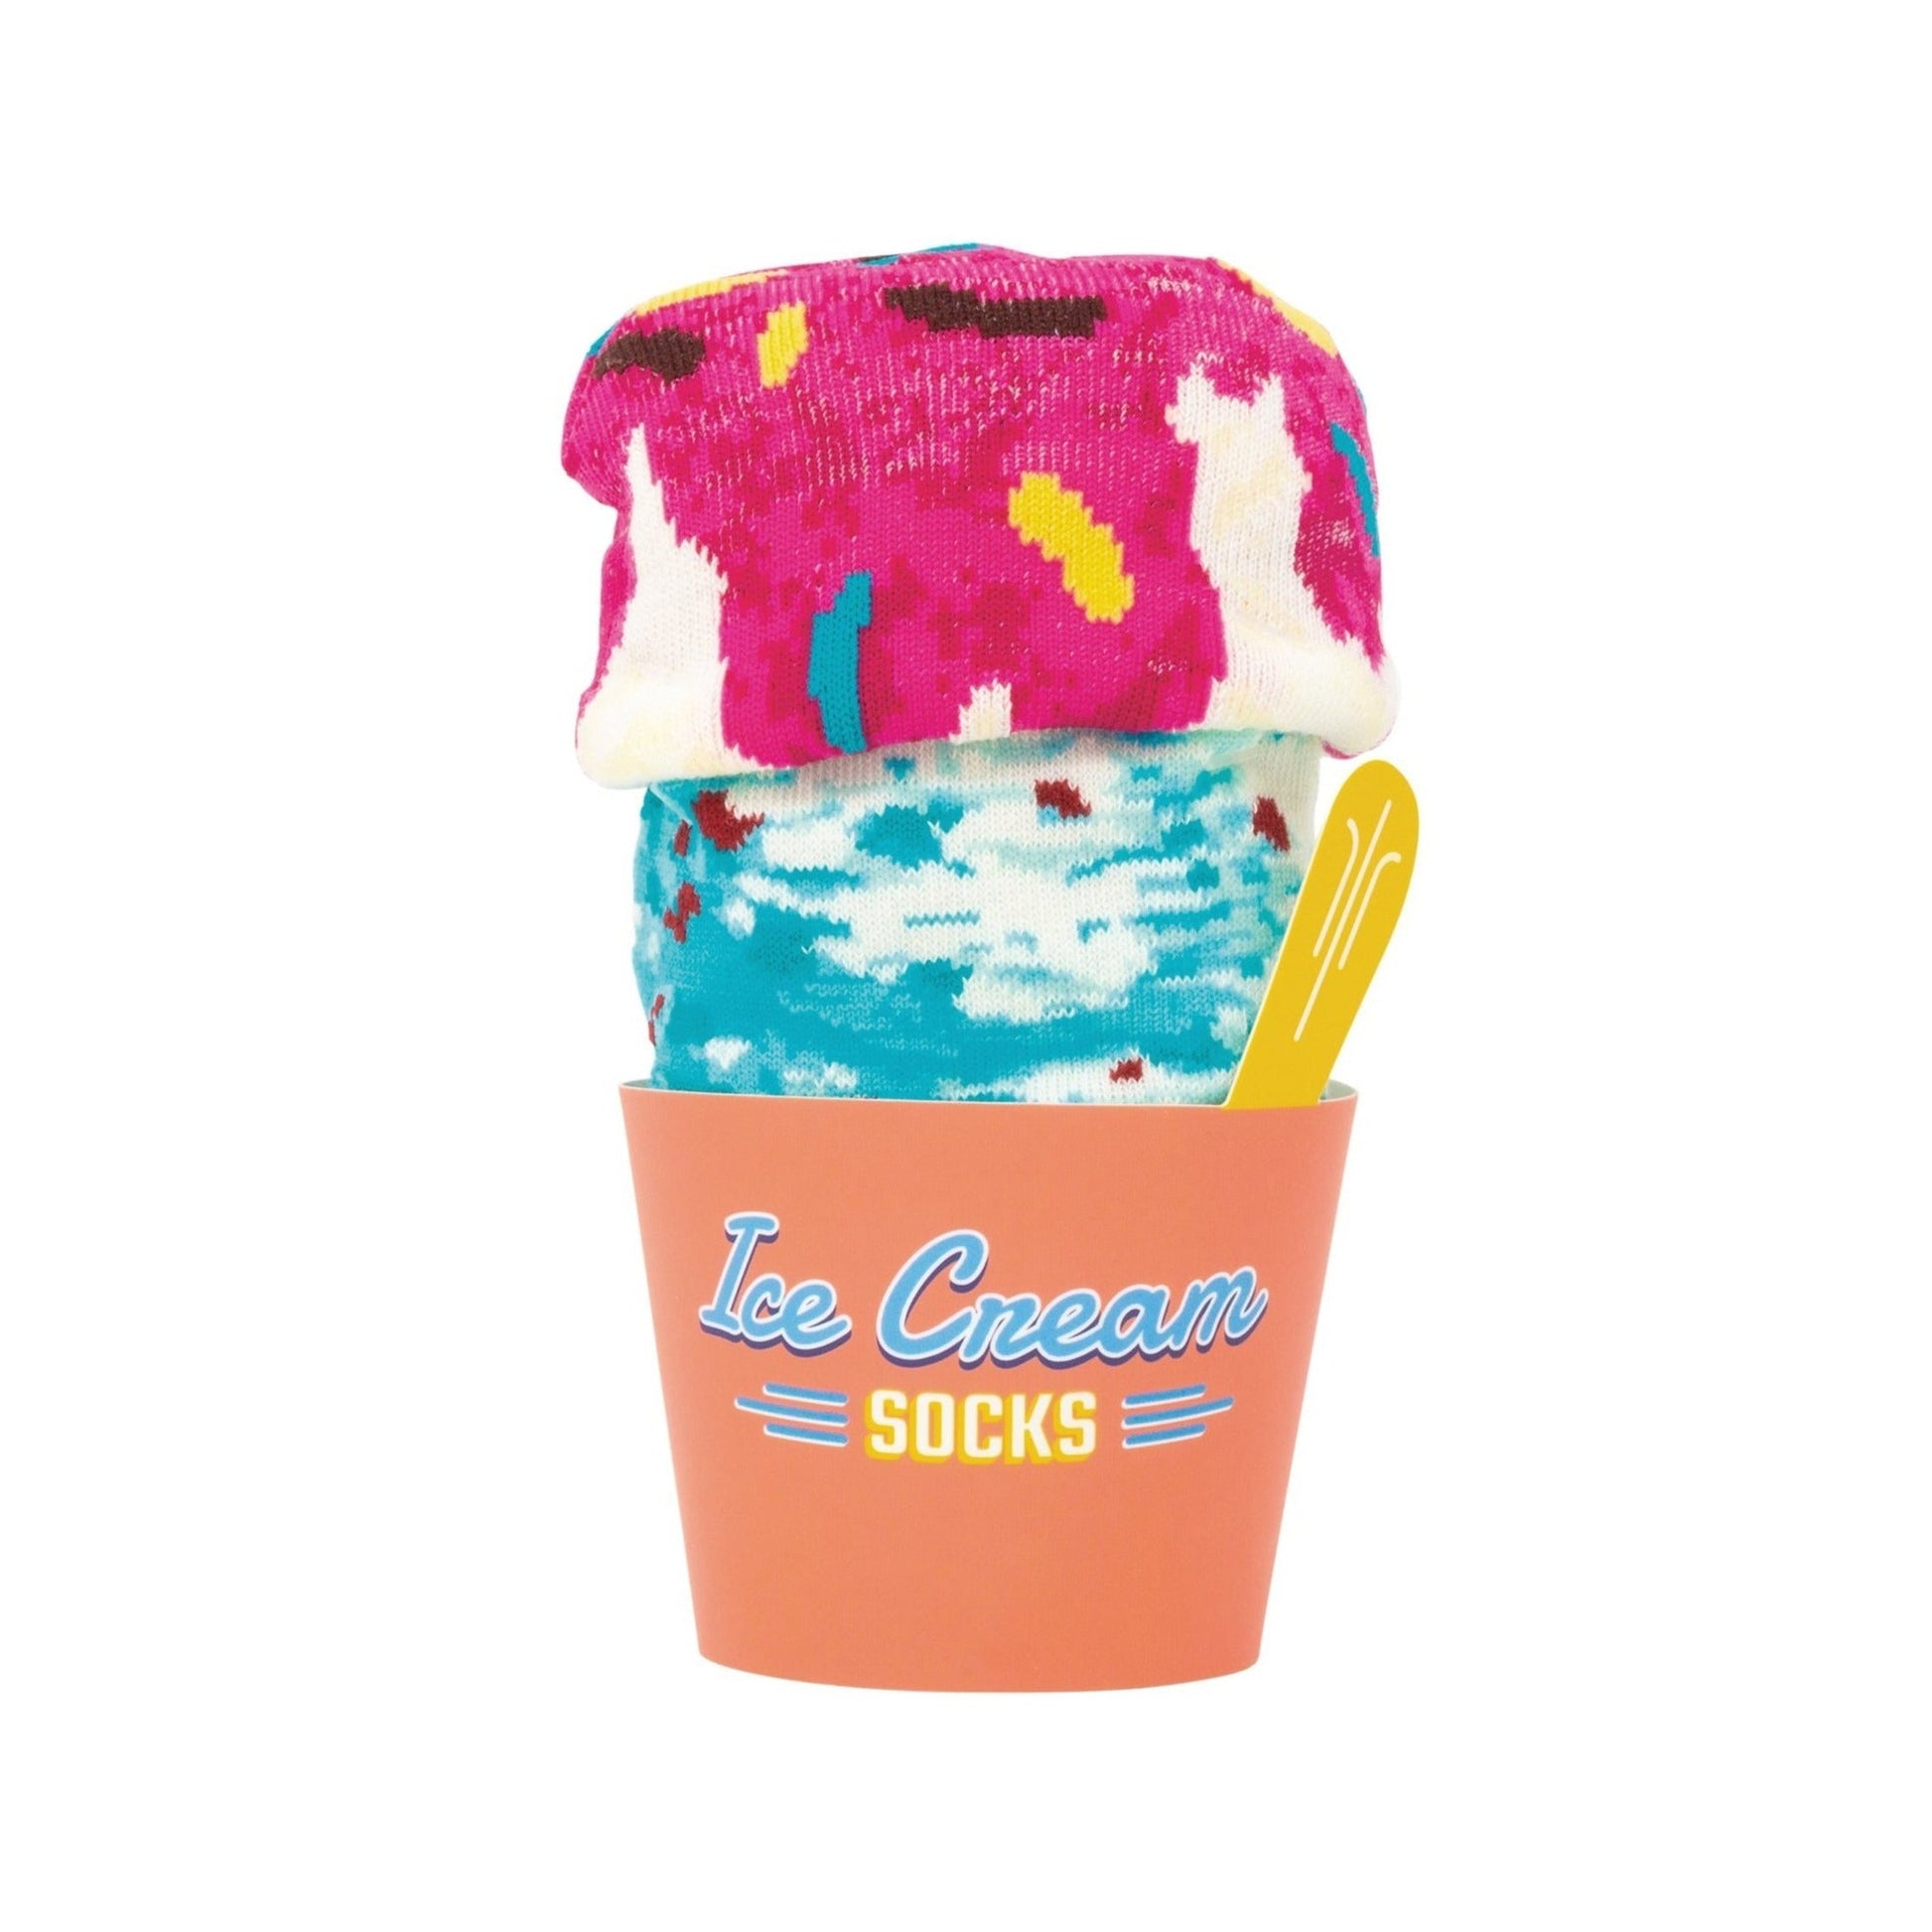 Ice Cream Socks in Mixed Berry Cheesecake | Cute Women's Socks Rolled Up as Ice Cream for Gifting